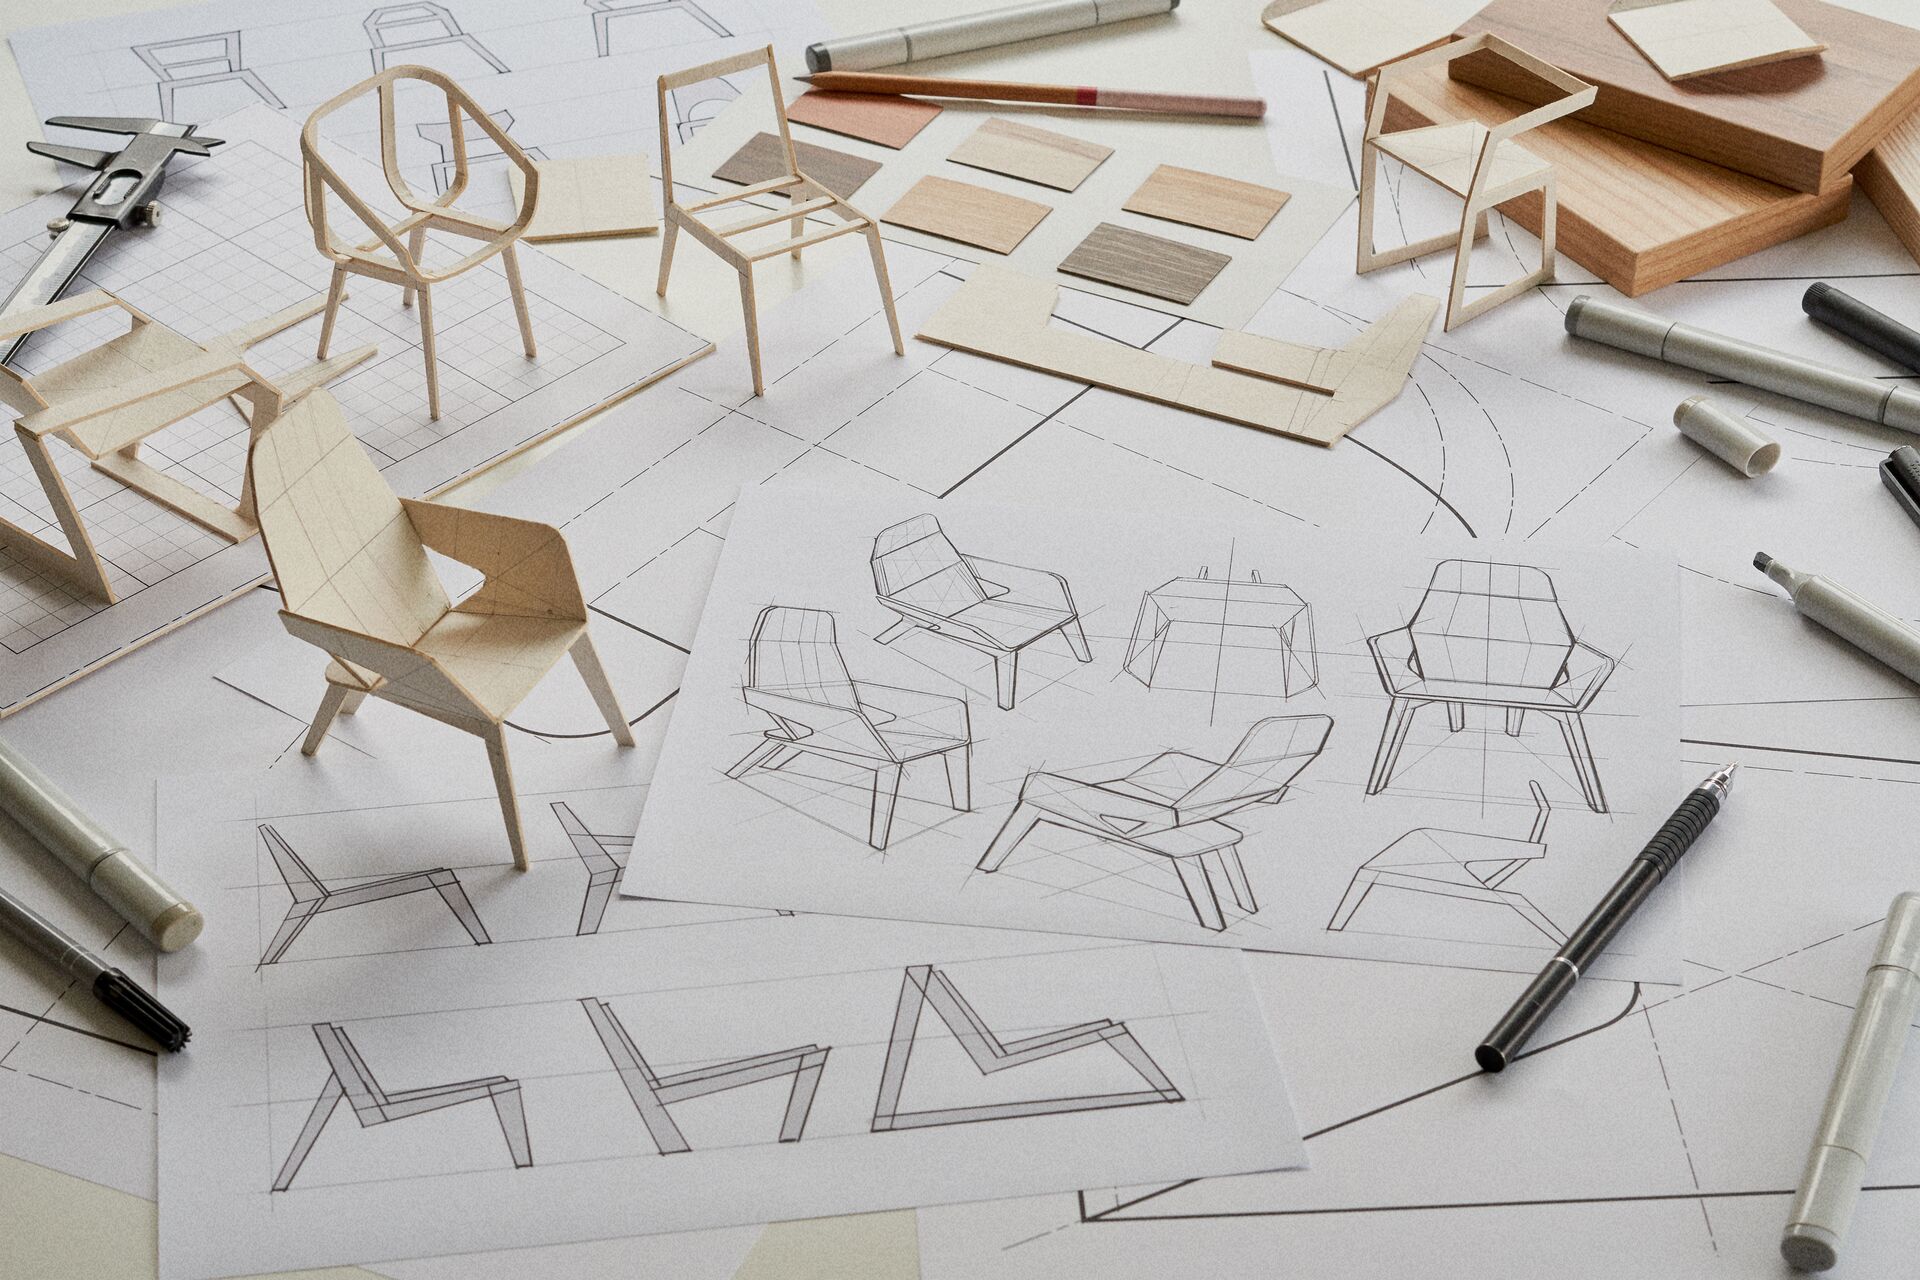 Chair small sized prototypes and sketches with pencils